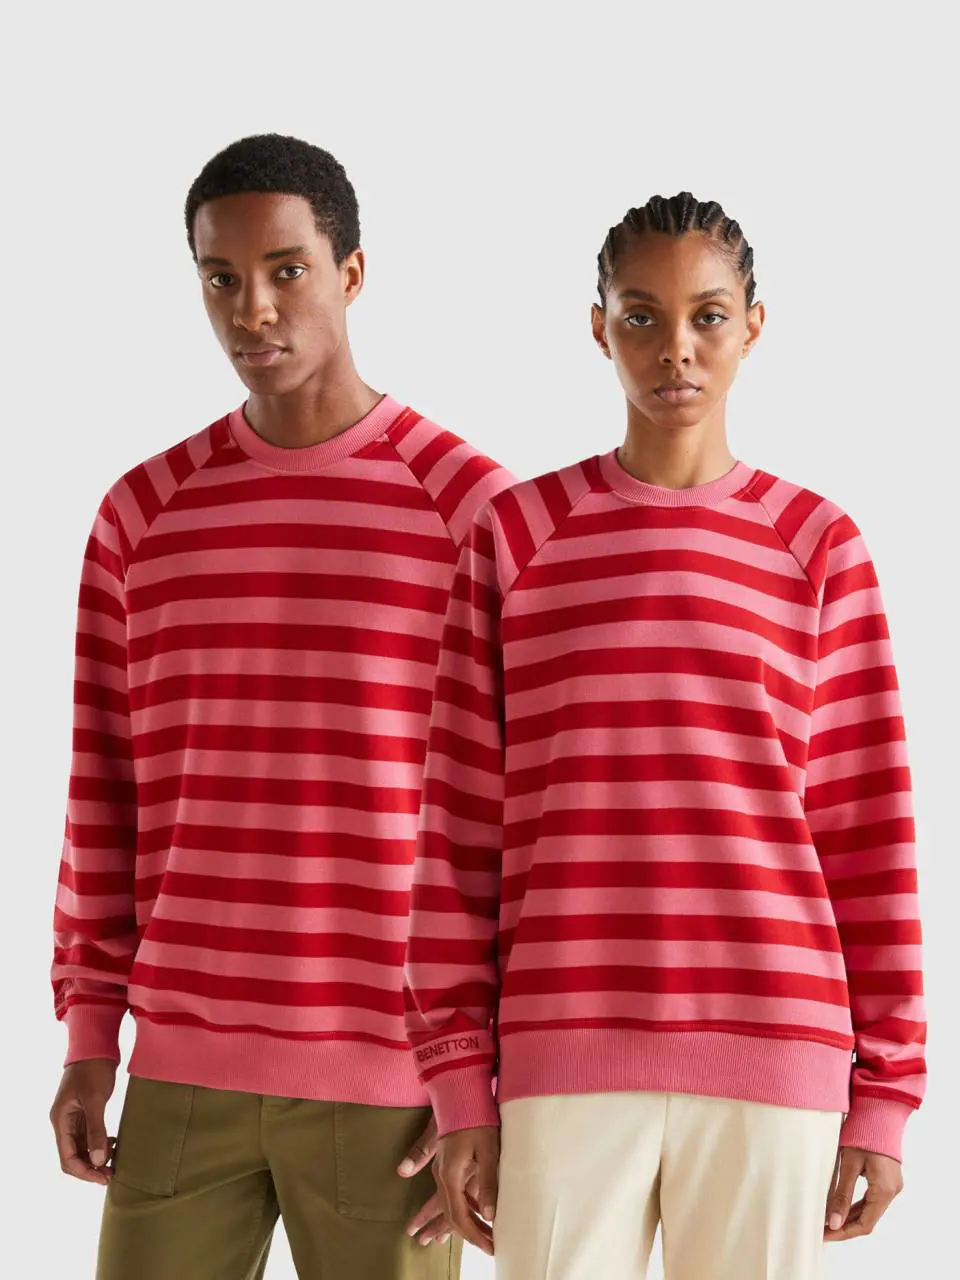 Benetton pink and red striped sweatshirt. 1